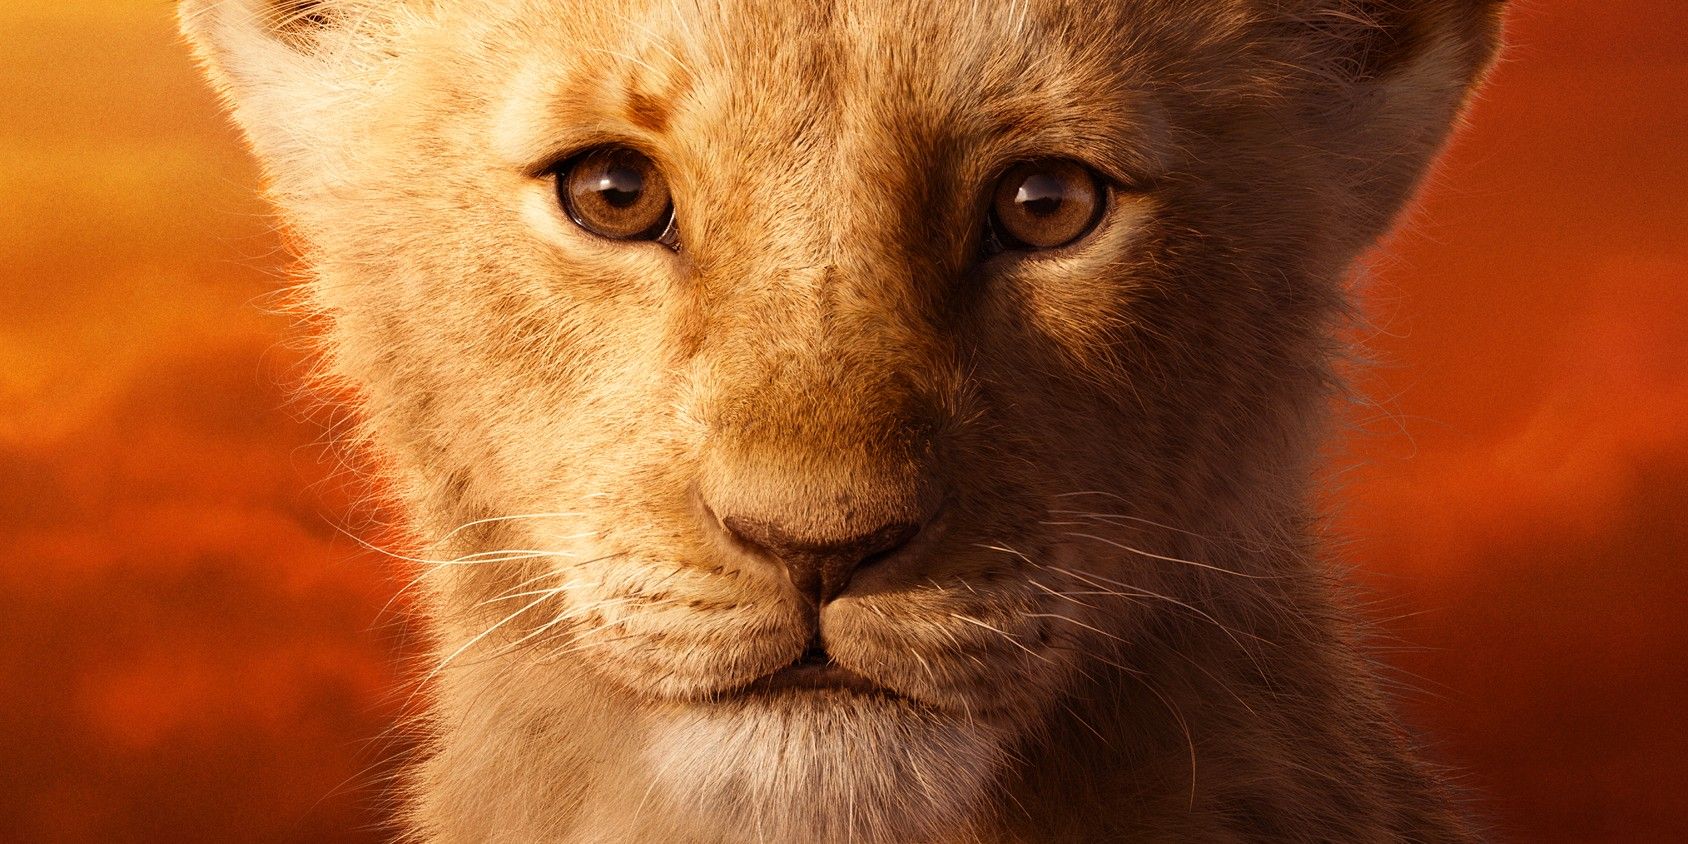 The Lion King 2019 Young Simba poster